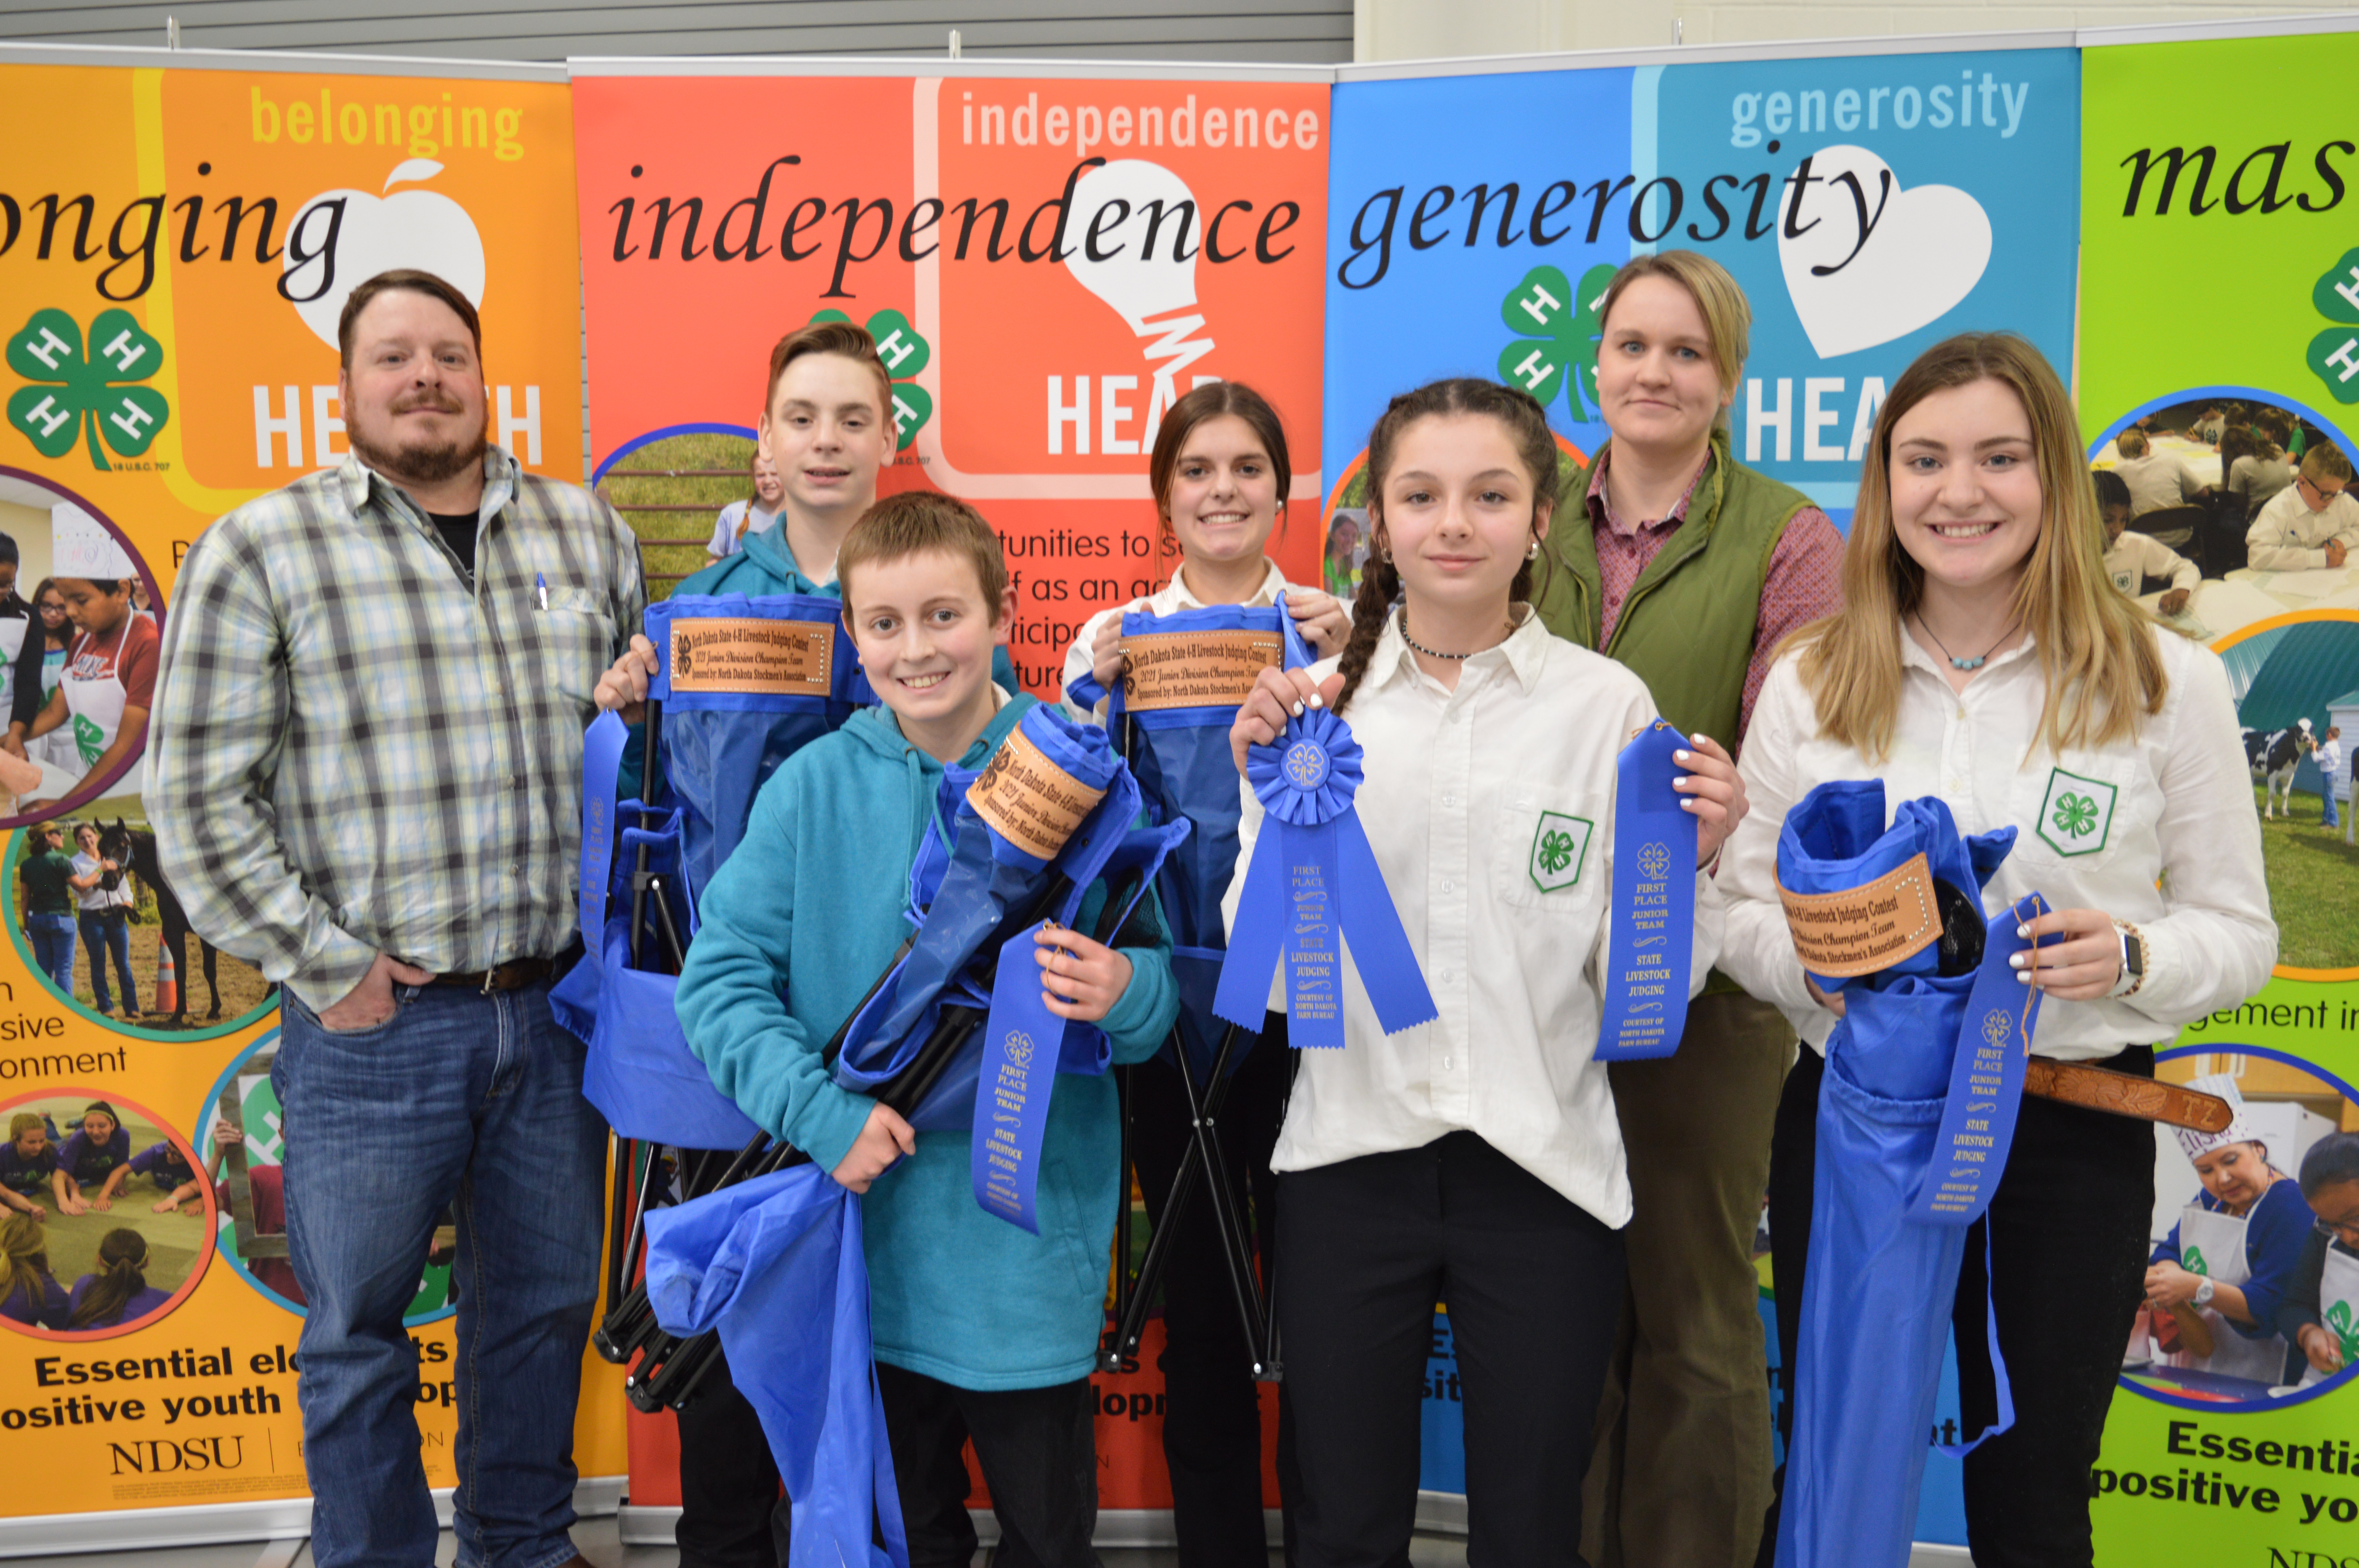 The Grant County 4-H team took first place in the junior division of the state 4-H livestock judging contest held in Watford City, N.D. Pictured are, from left, back row: Steven Zenker (coach), Landan Zenker, Kaitlyn Hauge and Tessa Osterbauer (Grant County Extension agent); front row, Layton Redmann, Addison Dahners and Taylor Zenker. (NDSU photo)